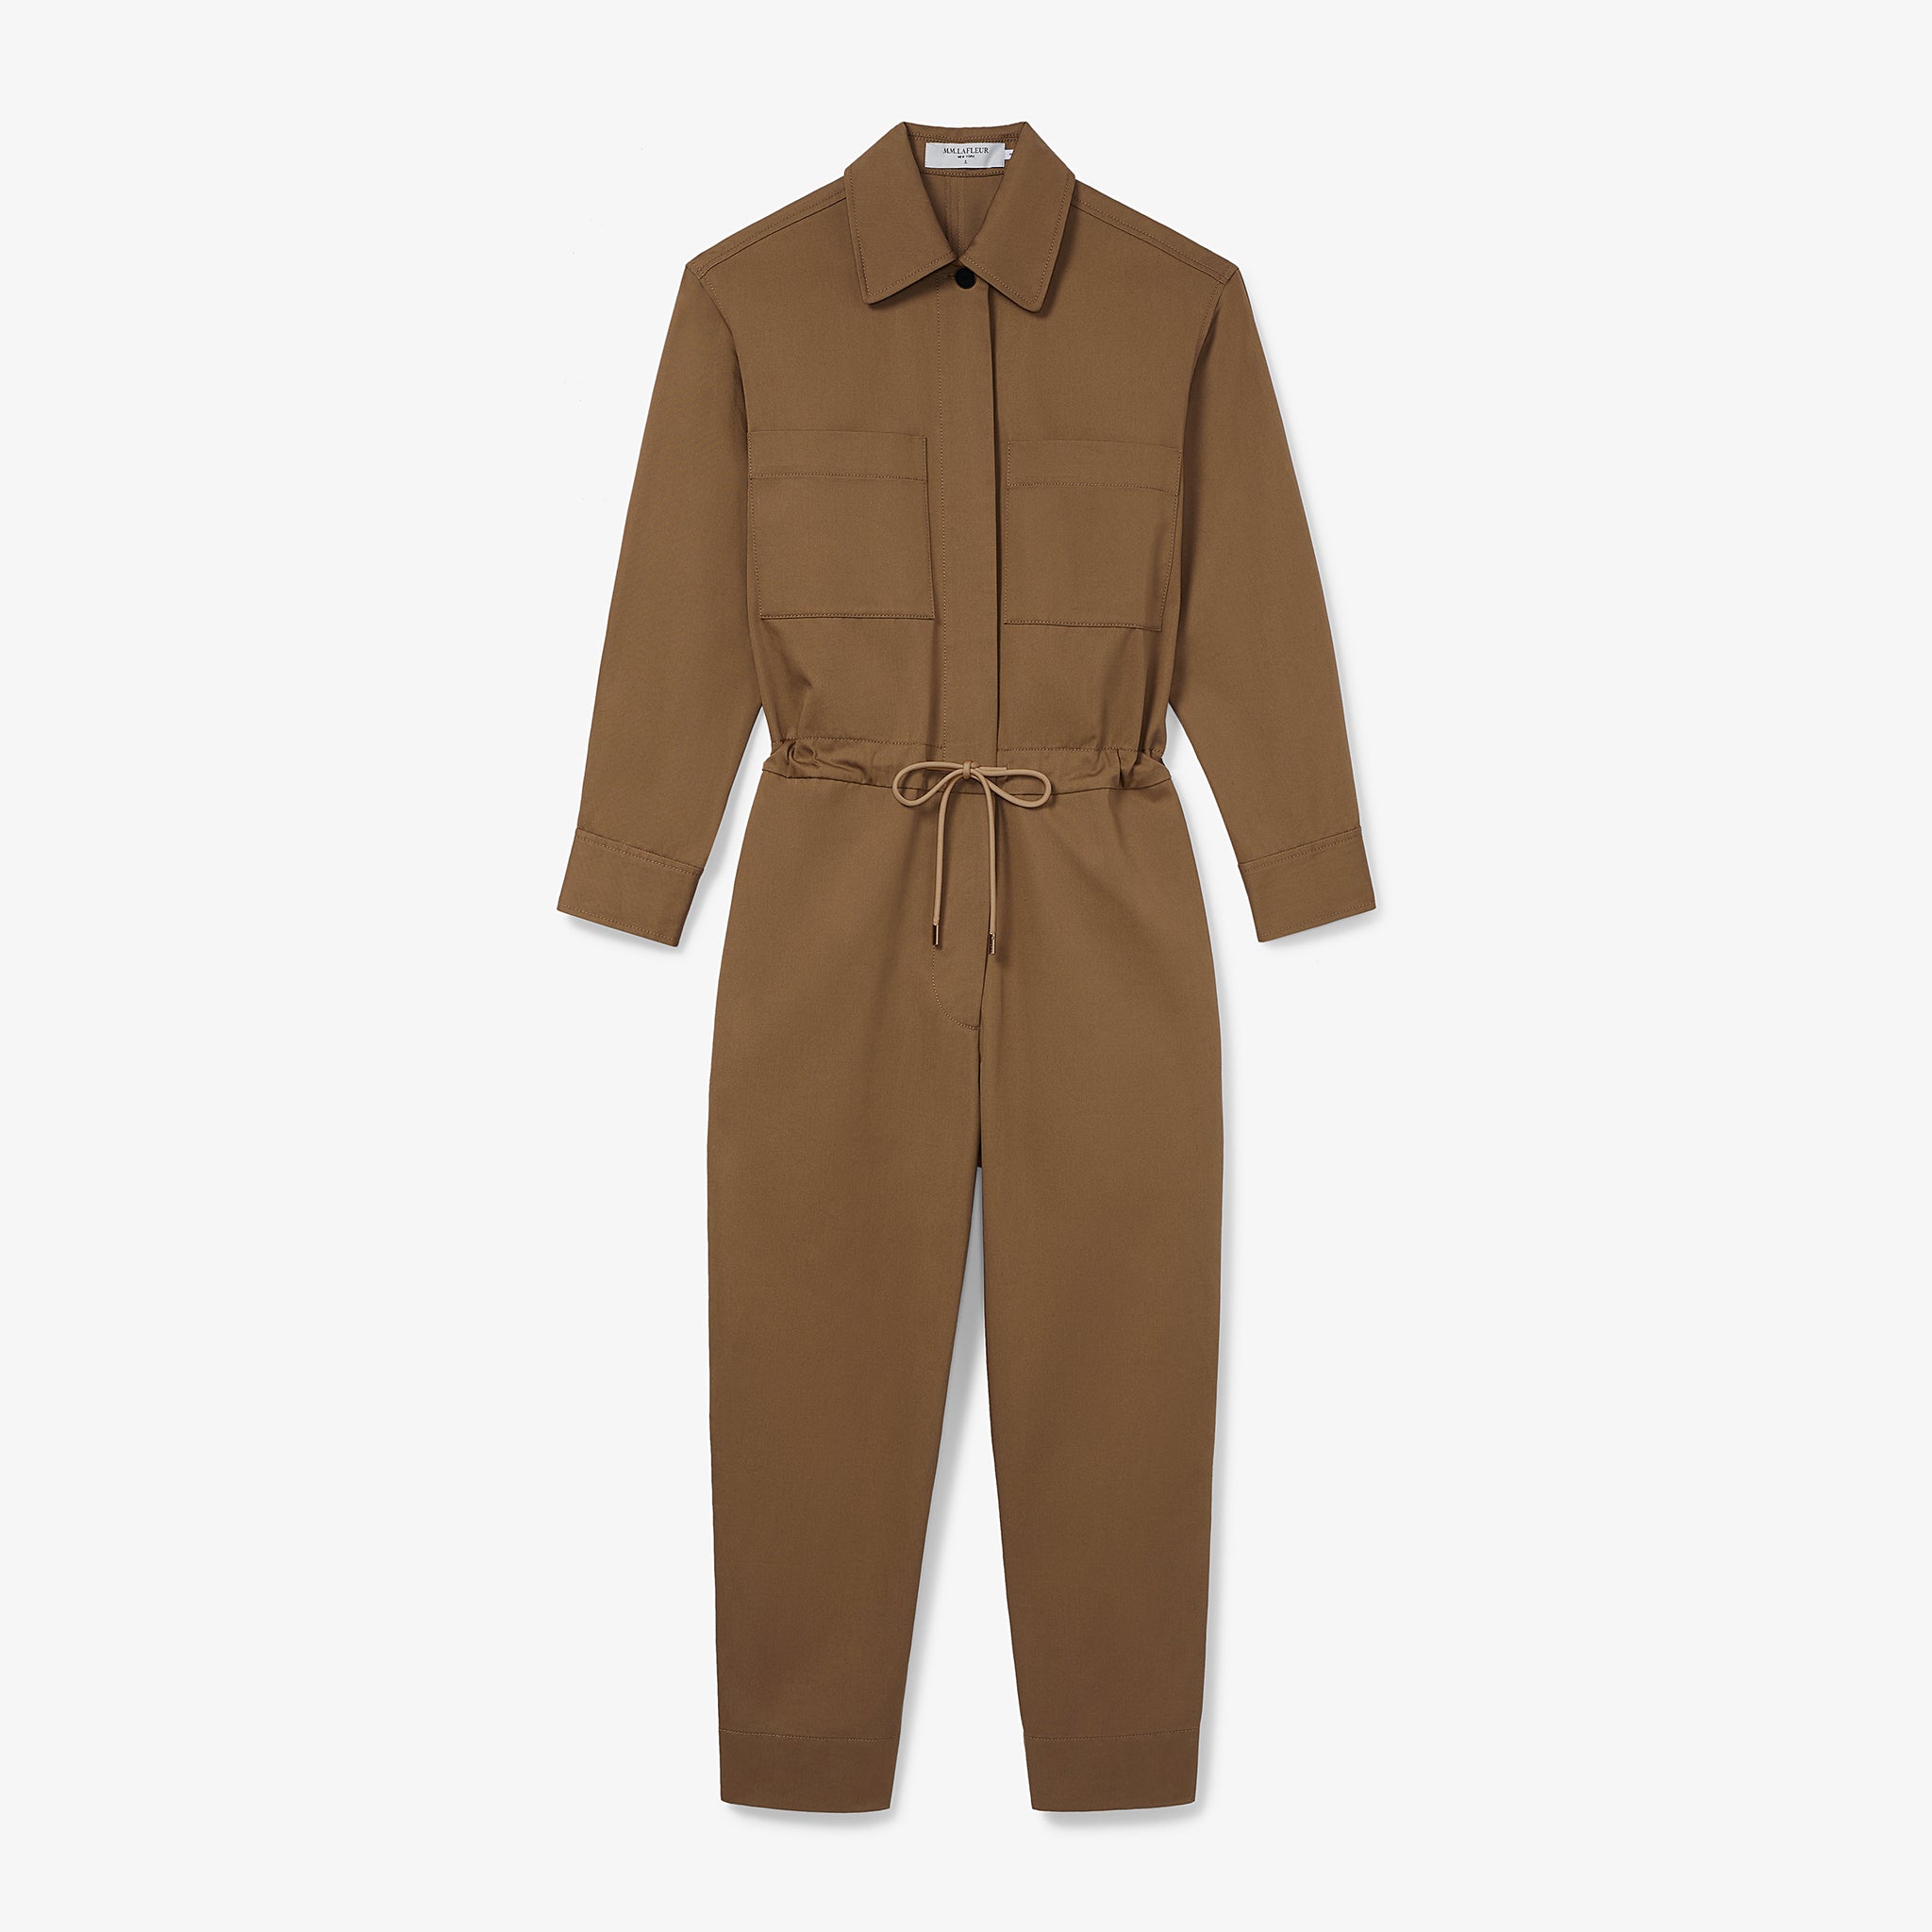 Packshot image of the Carr Jumpsuit in Sepia